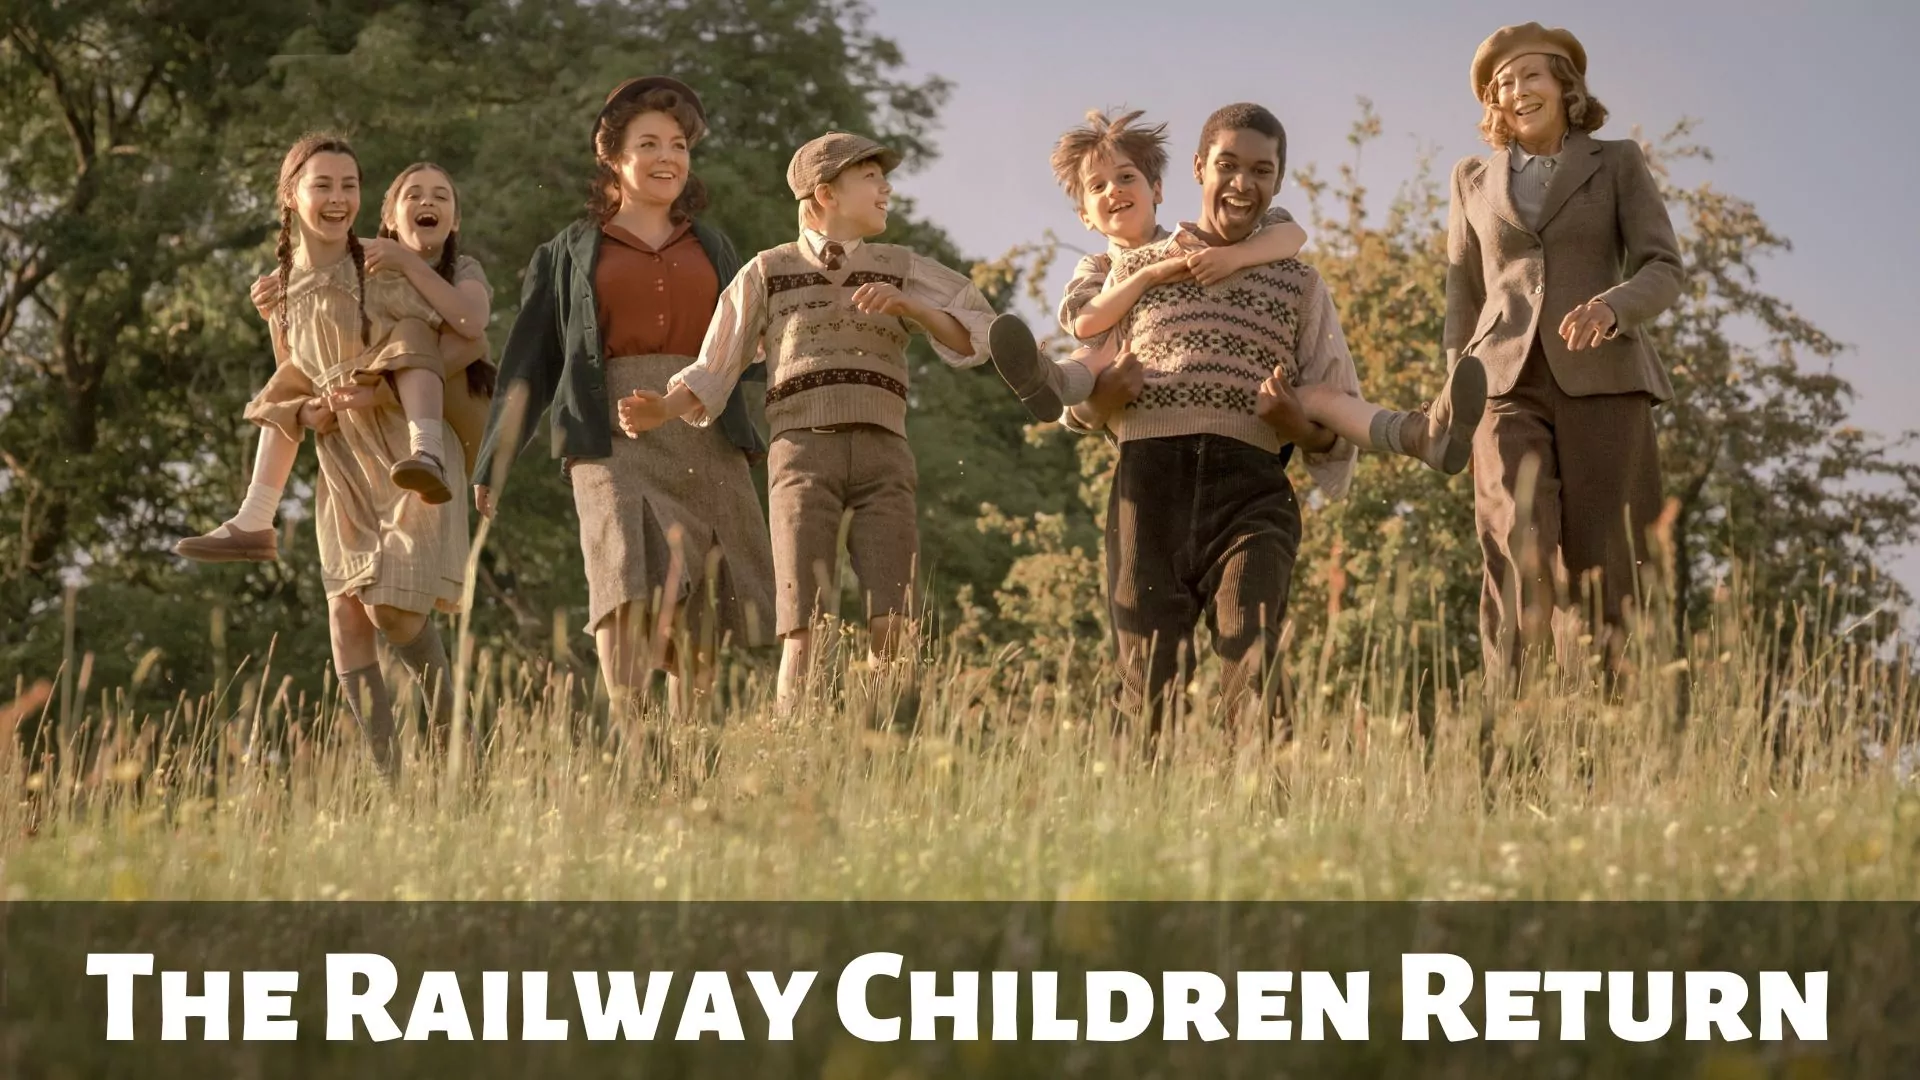  The Railway Children Return Parents Guide | Age Rating